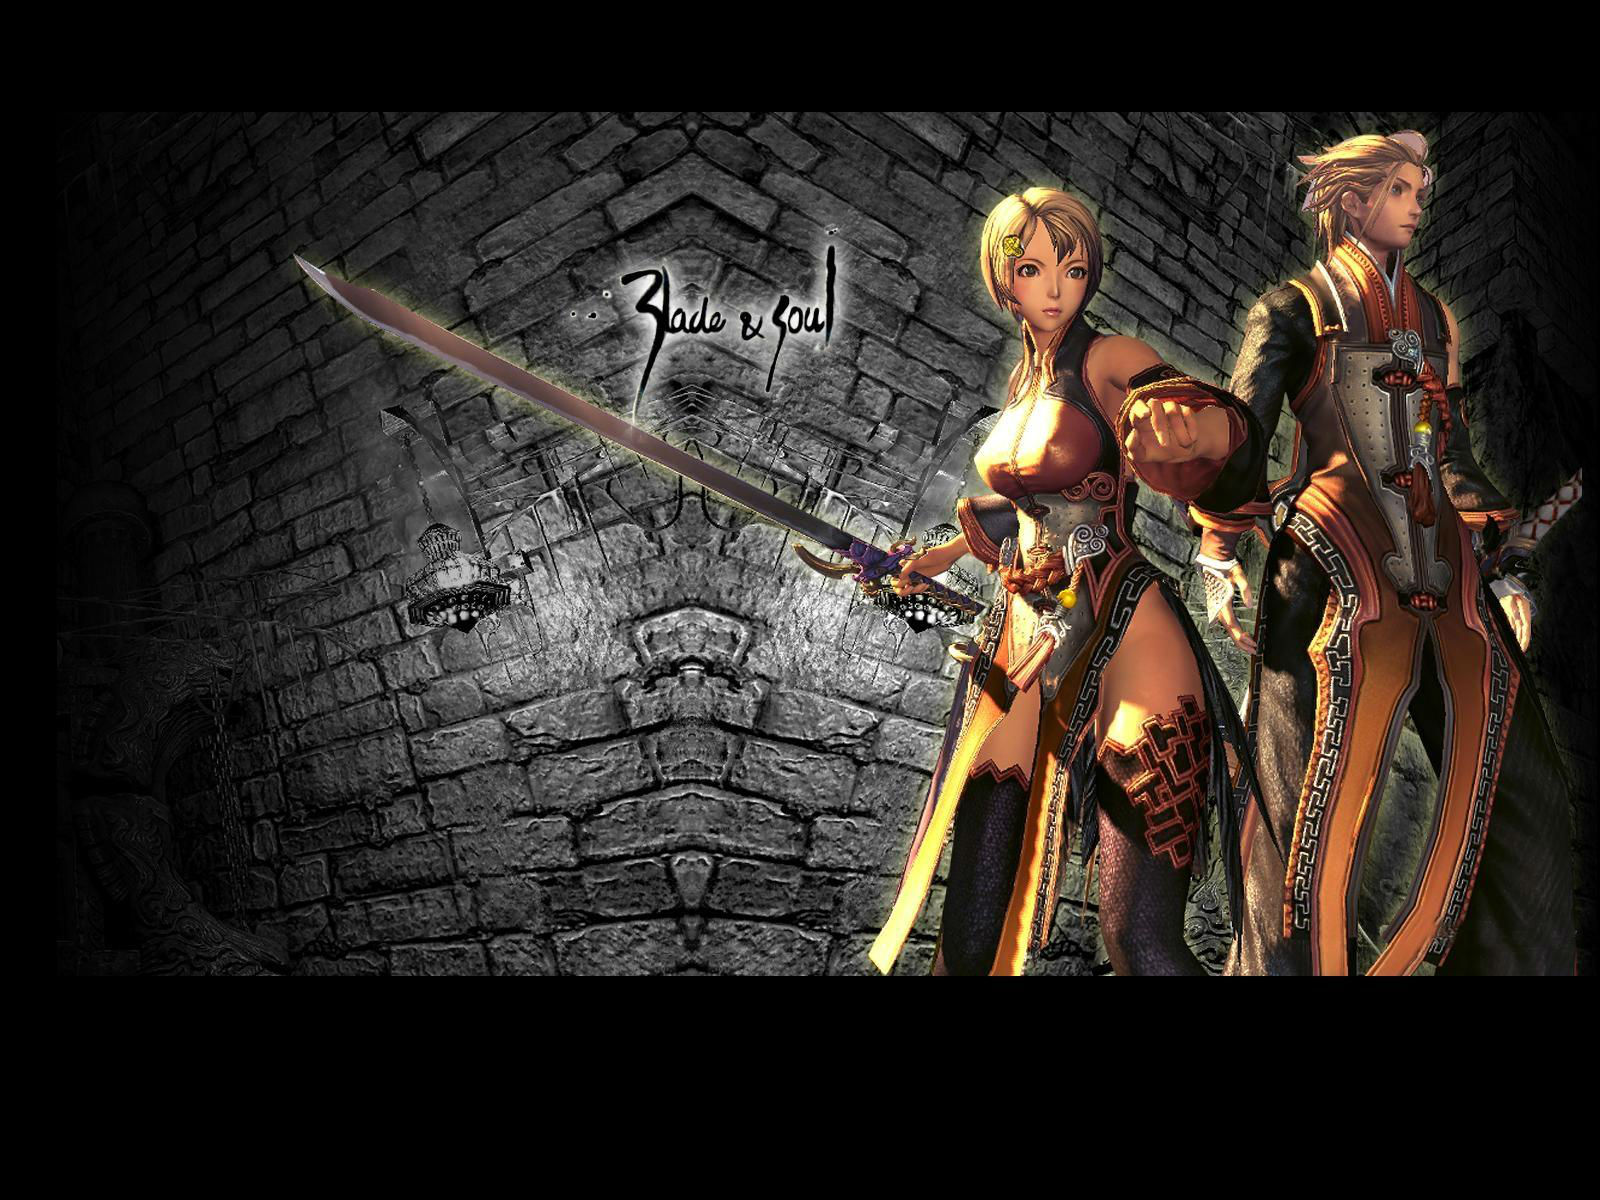 blade and soul wallpaper,action adventure game,pc game,cg artwork,adventure game,darkness